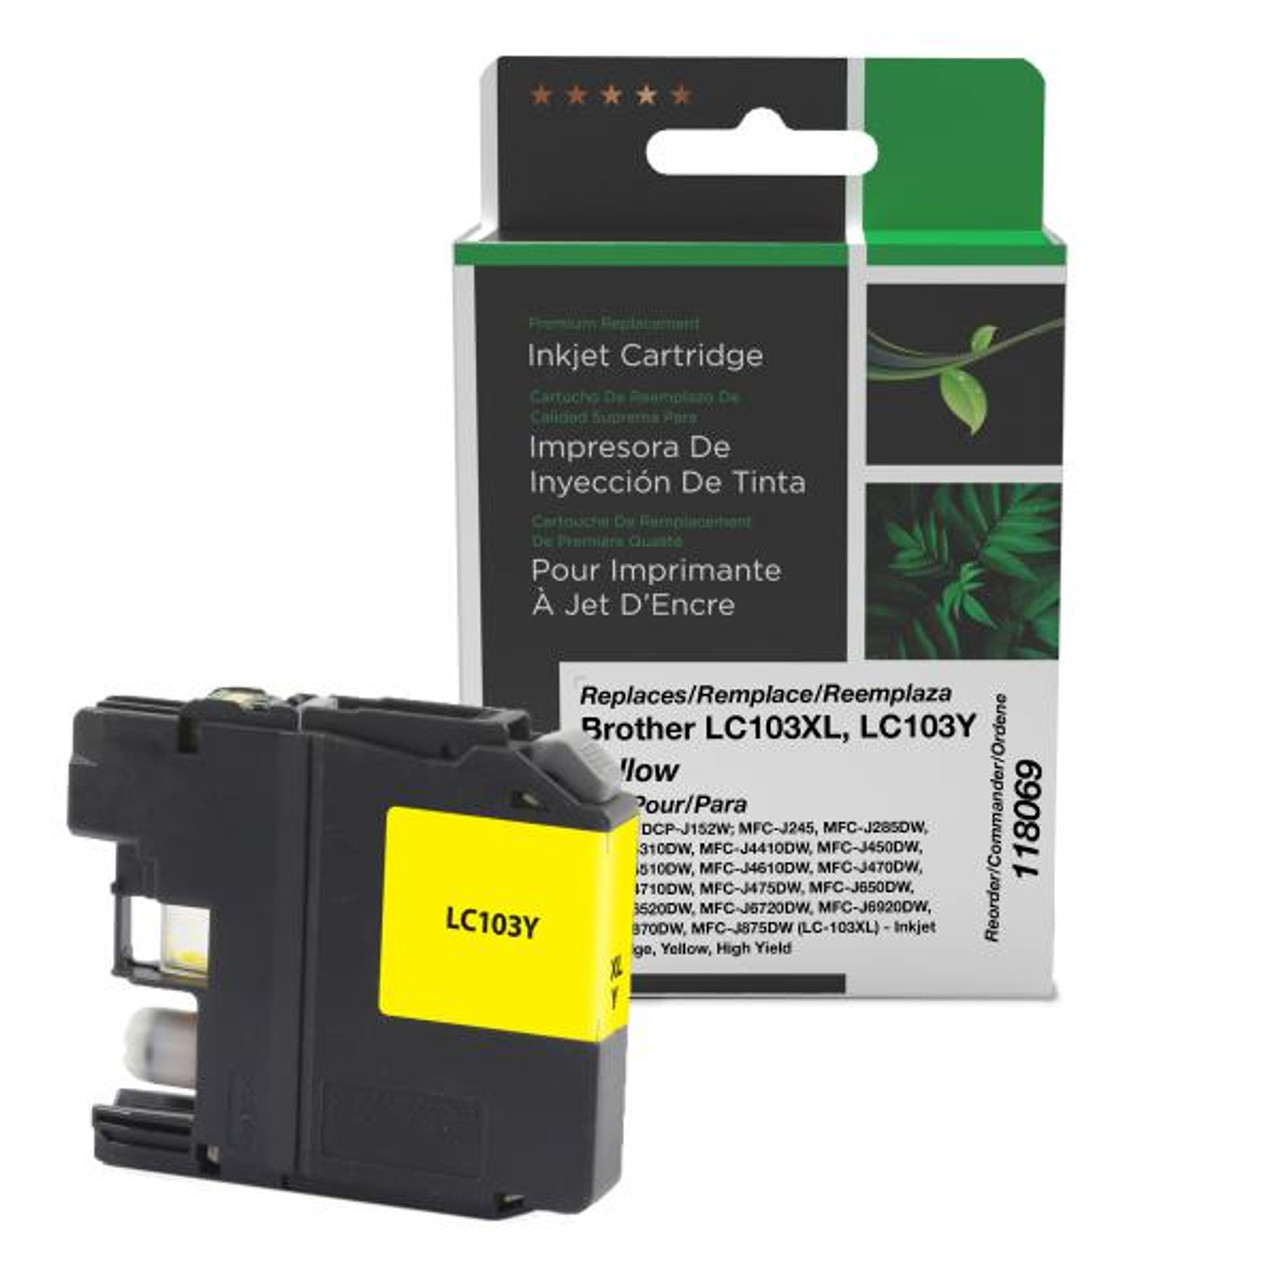 High Yield Yellow Ink Cartridge for Brother LC103XL-1